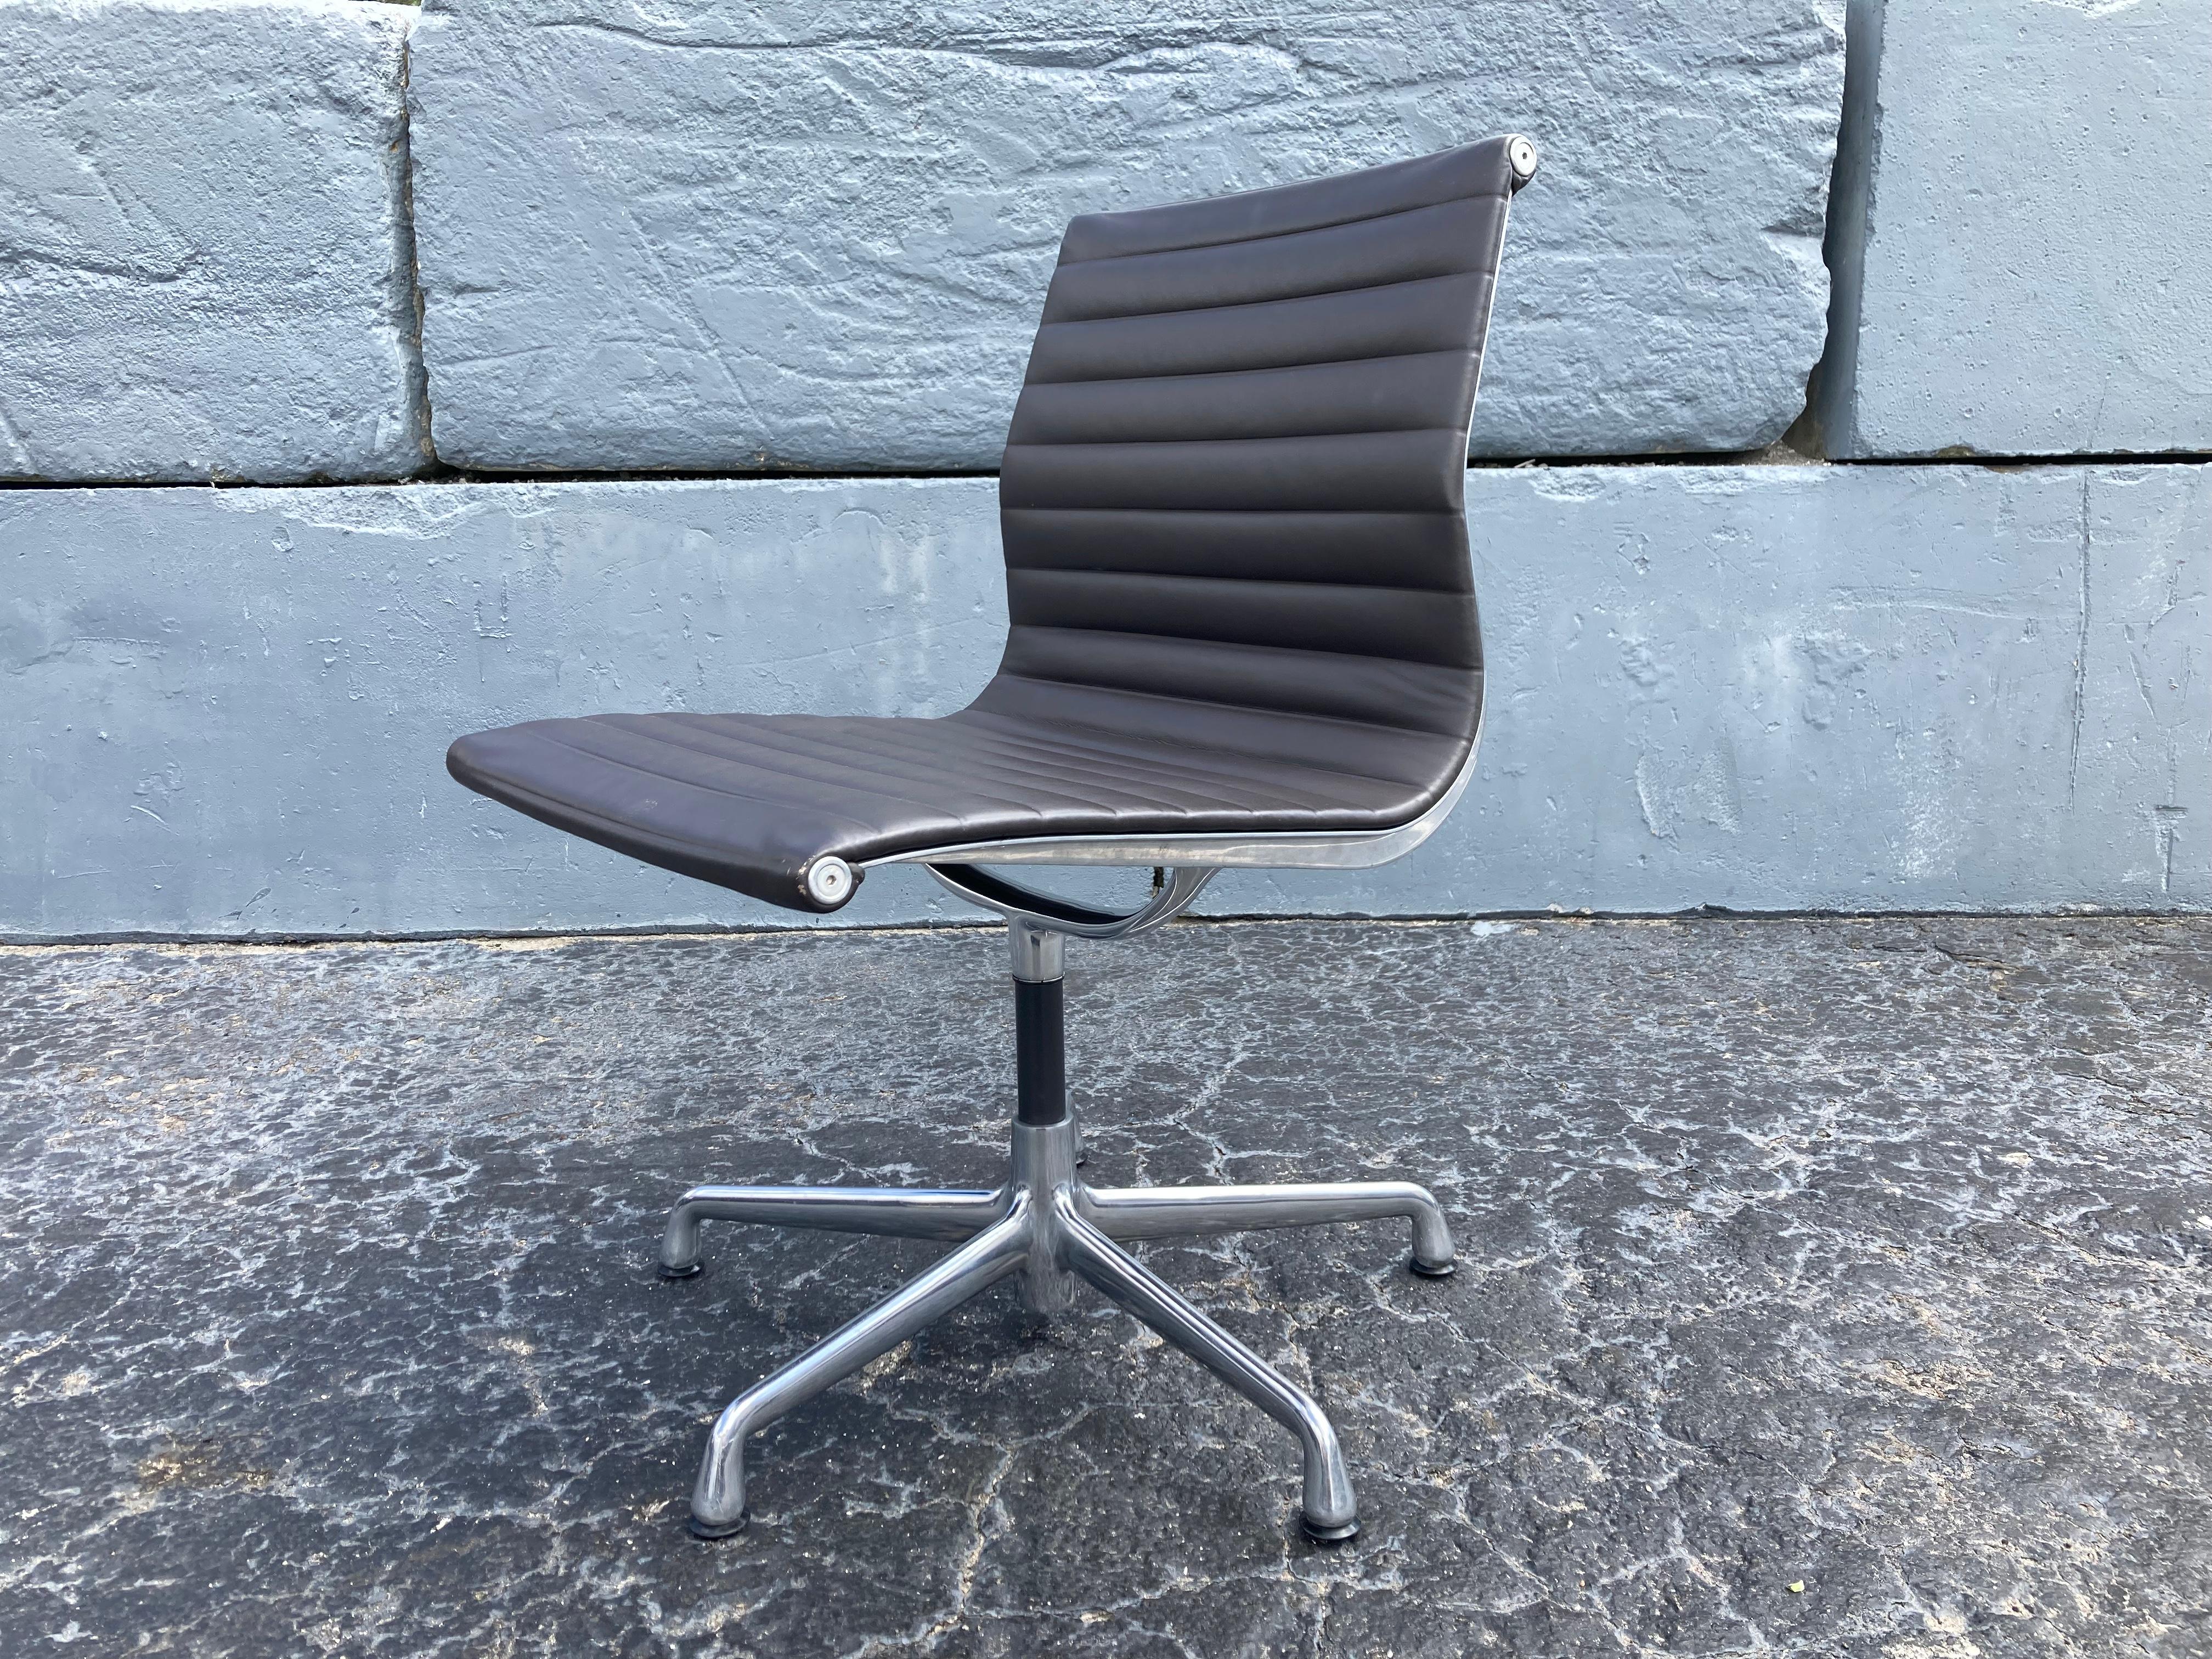 Eames swivel leather aluminum group side chairs. Chairs are from 2007 and 2009. We believe the leather is the chocolate color. Eighteen chairs available.